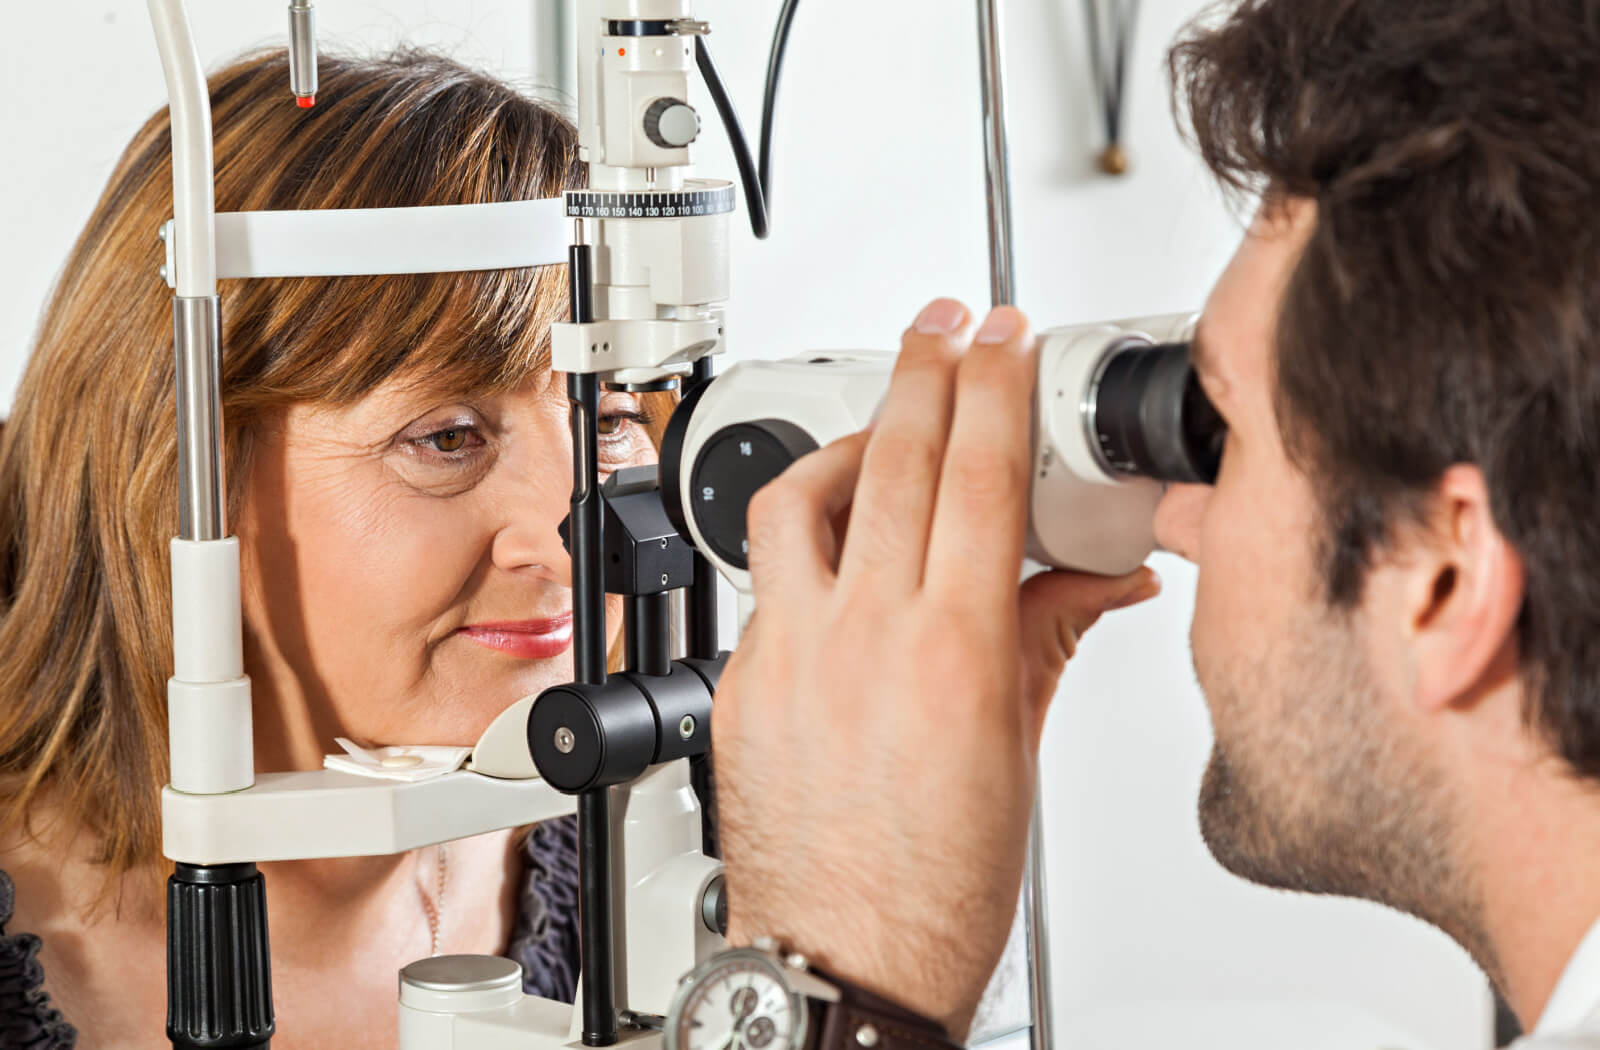 Middle-aged woman undergoing an eye exam